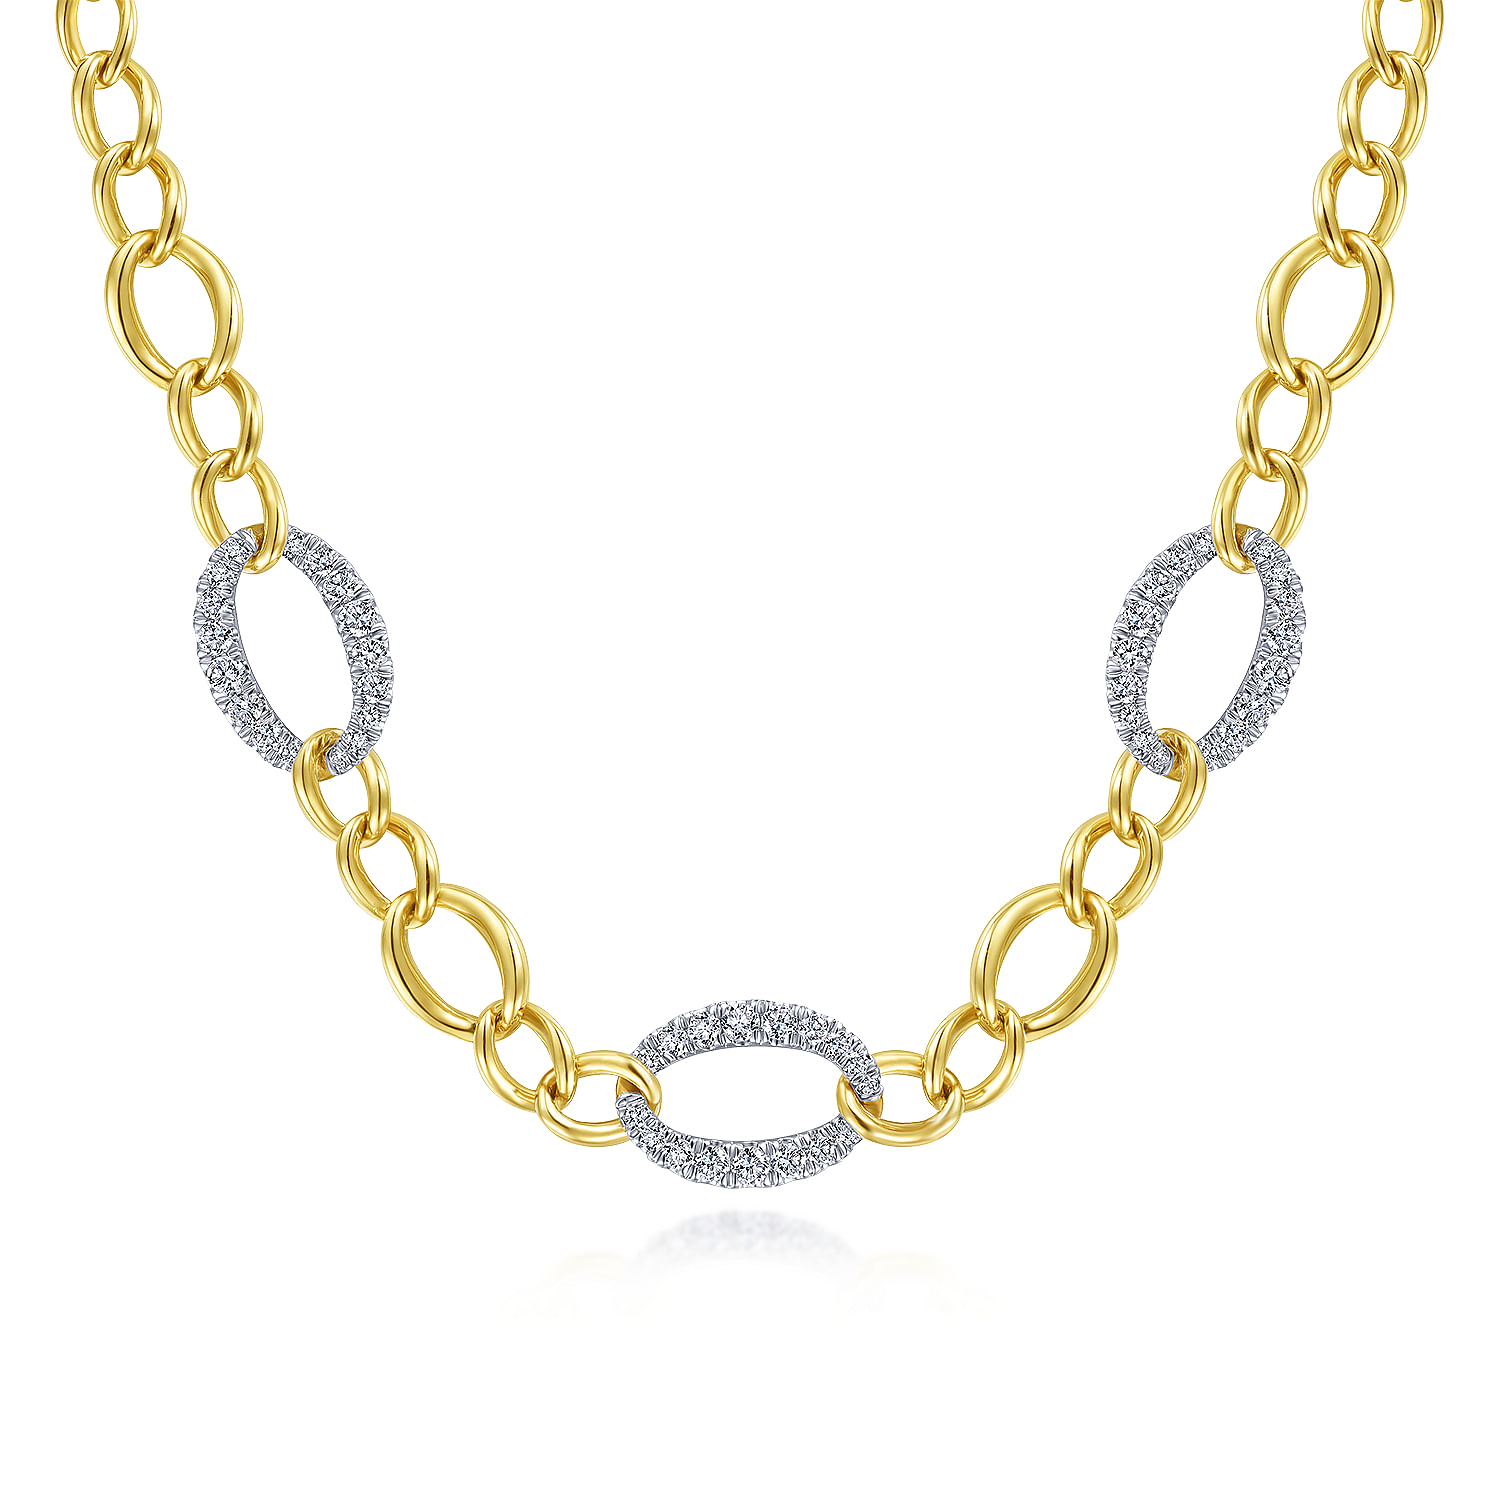 14K Yellow-White Gold Oval Chain Link Necklace with Diamond Pave